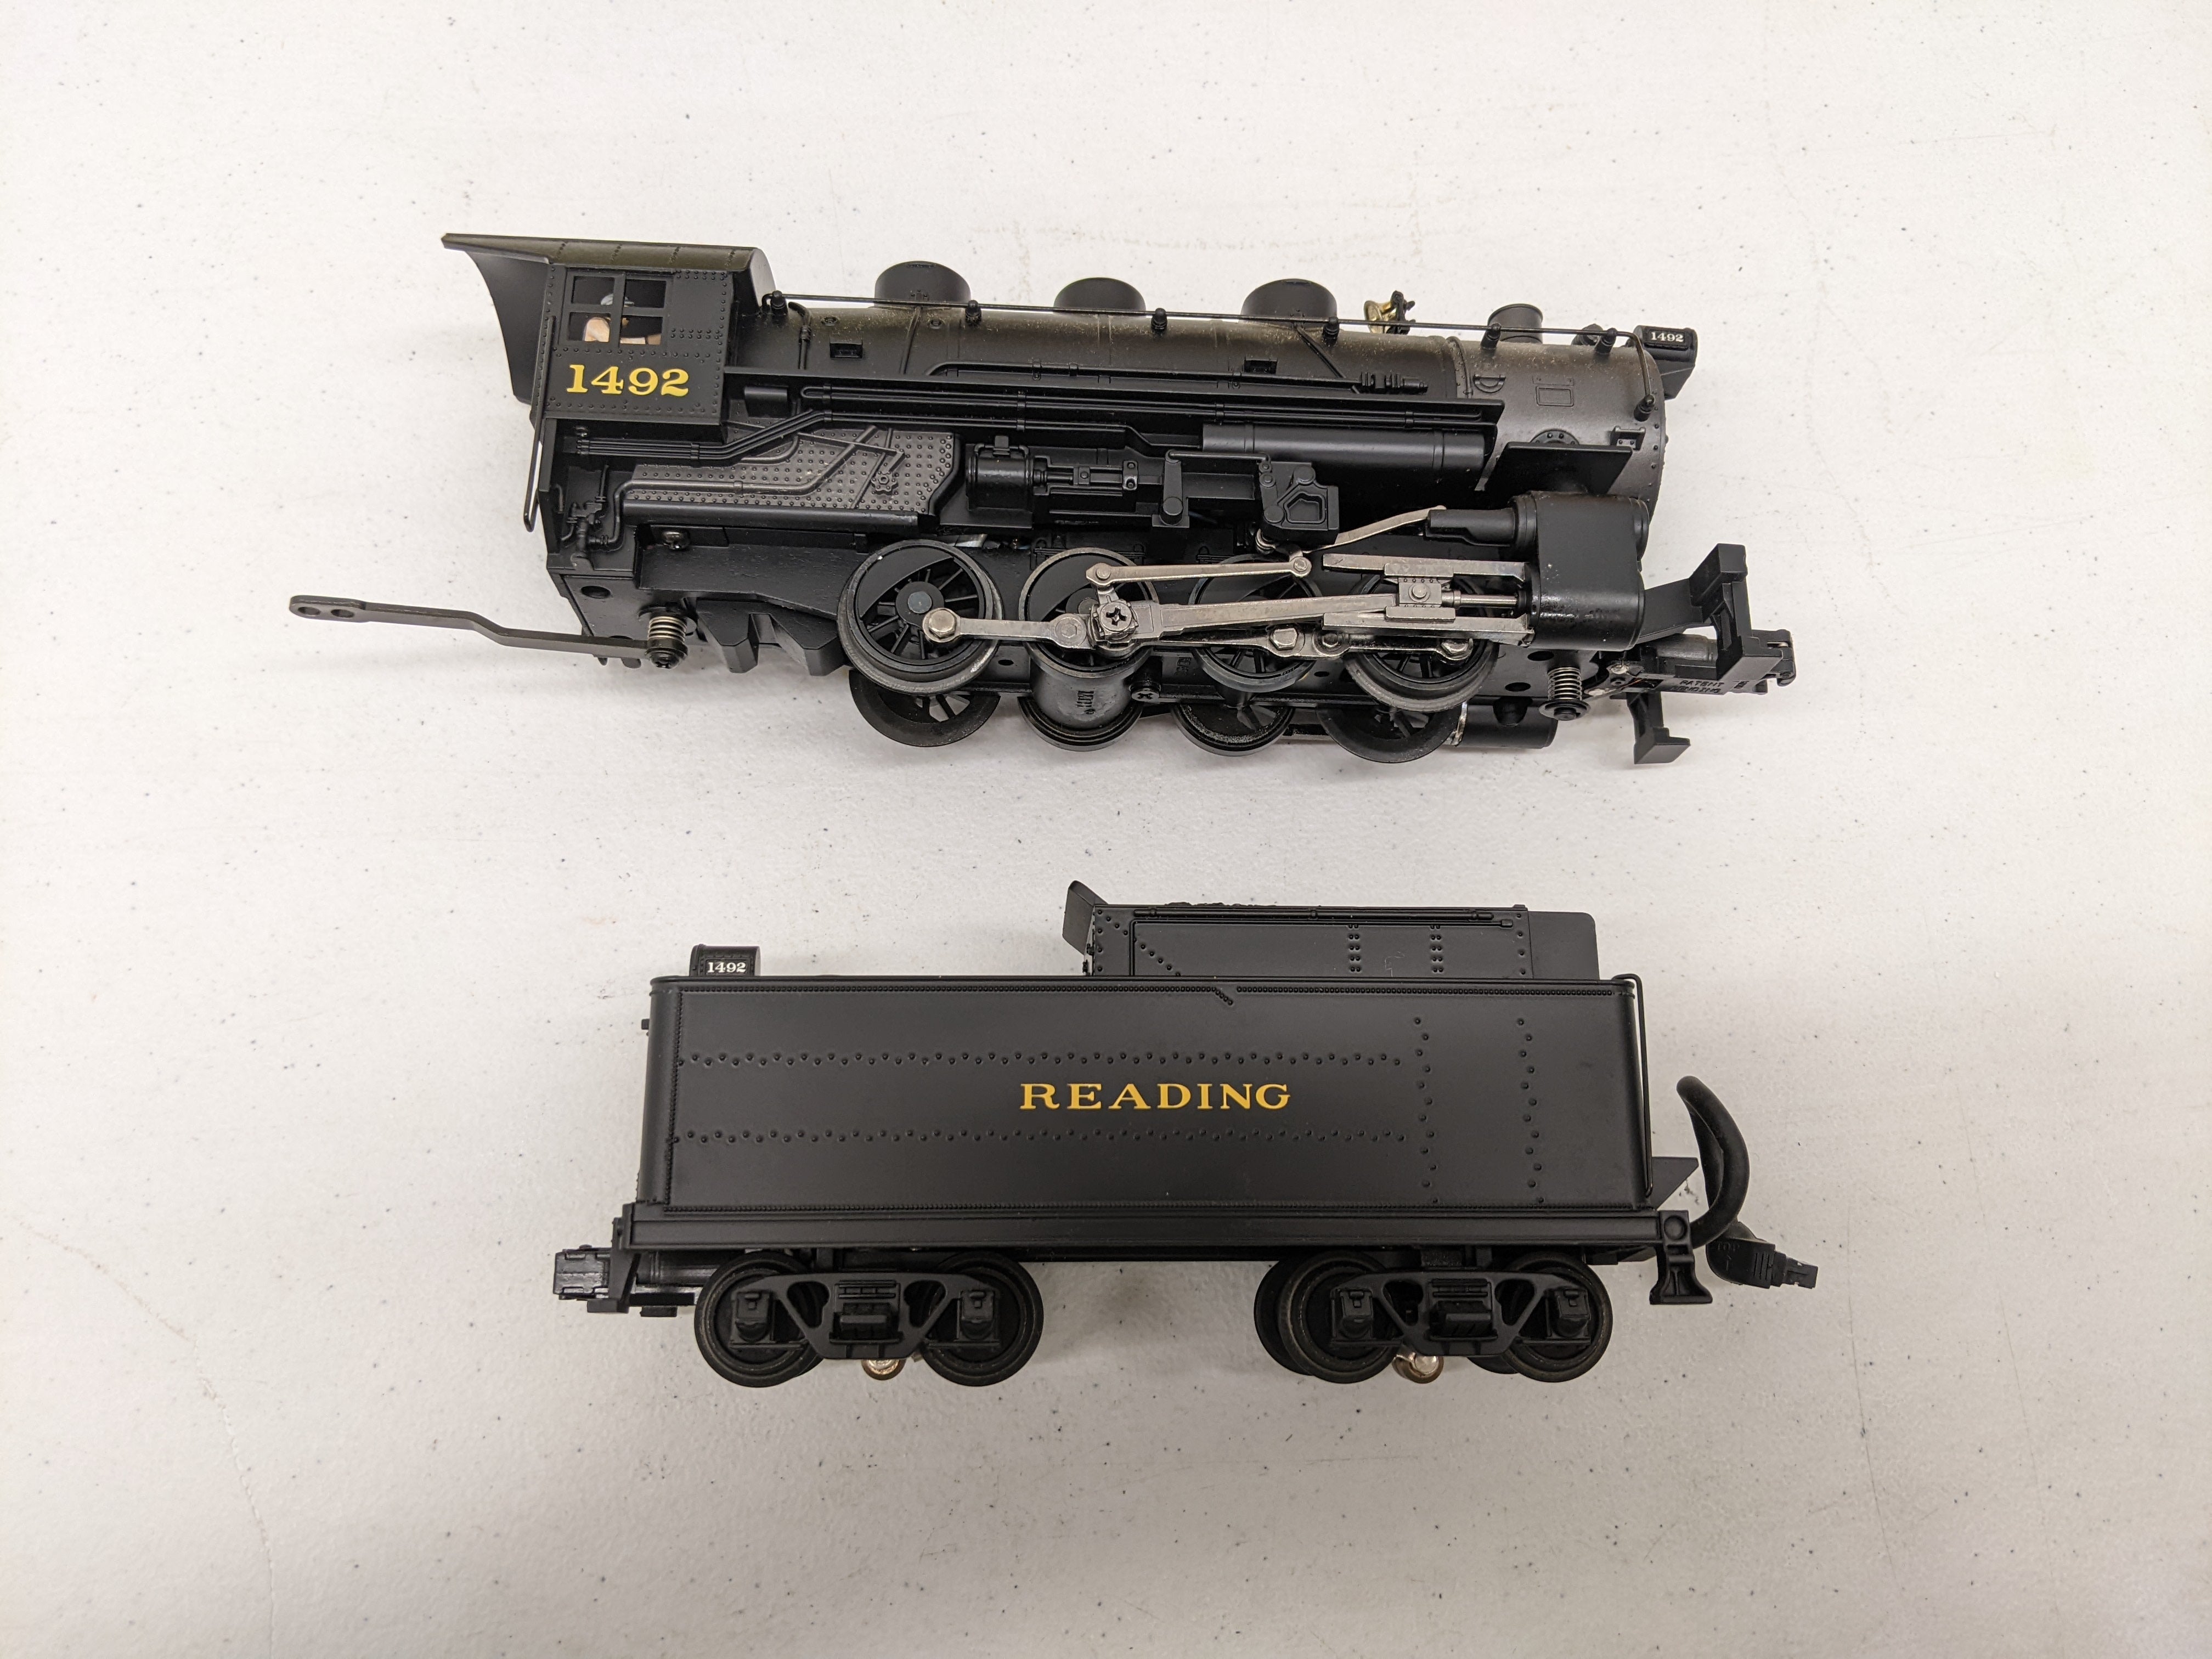 USED MTH Rail King 30-1294-1 O Scale, 0-8-0 Steam Engine, Reading #1492 (Proto-Sound 2.0)